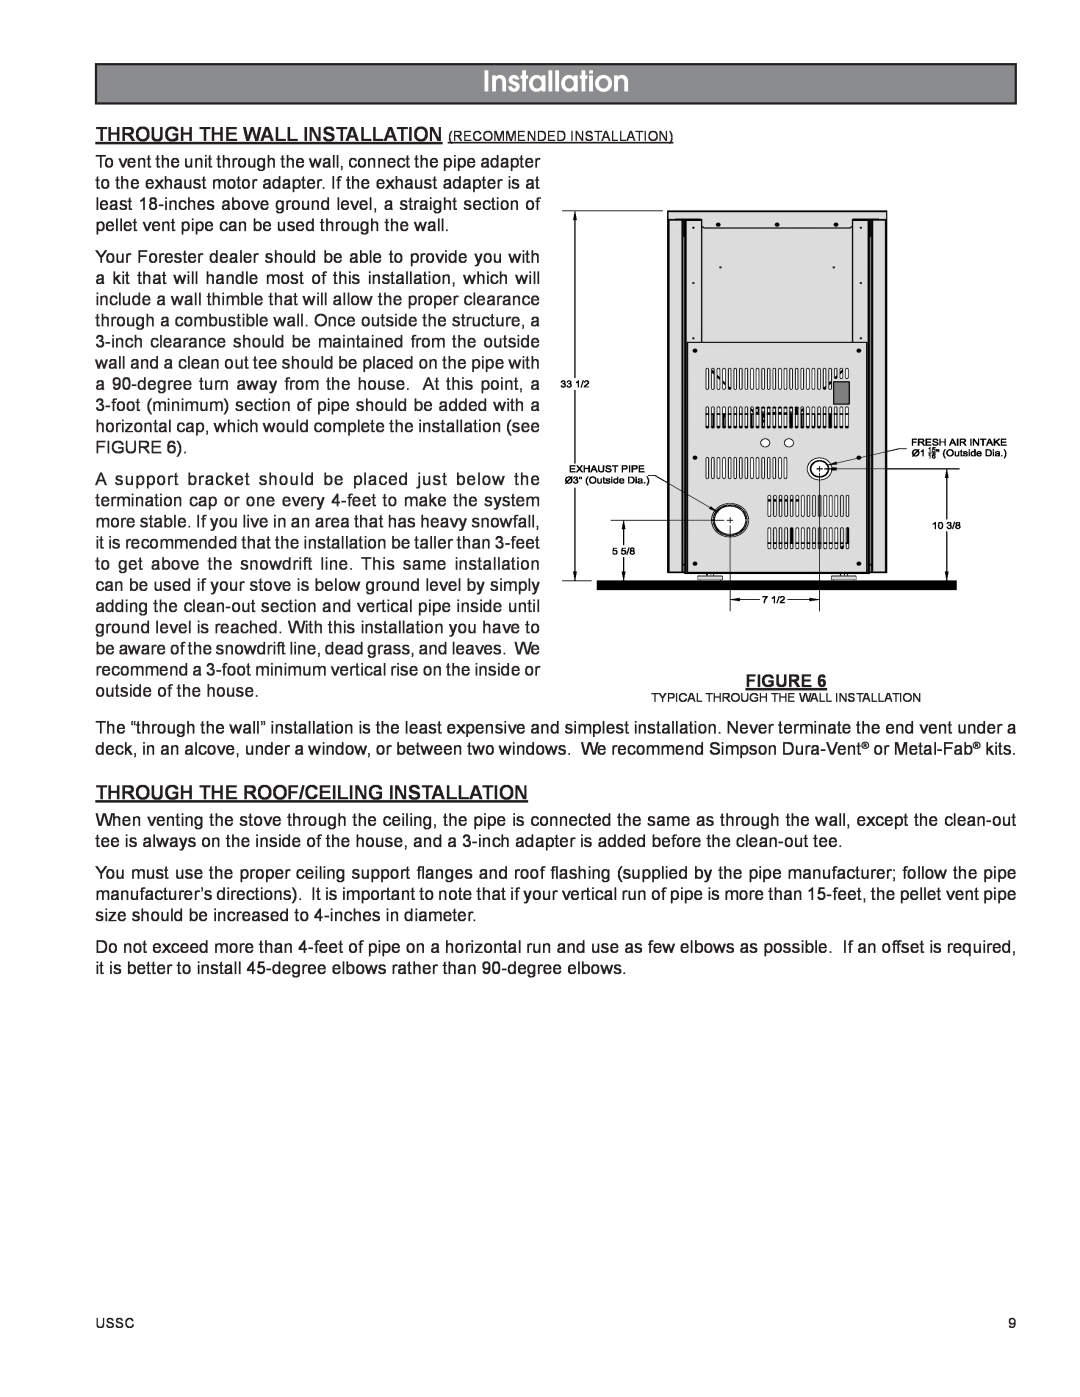 United States Stove 58242 owner manual Through The Roof/Ceiling Installation 